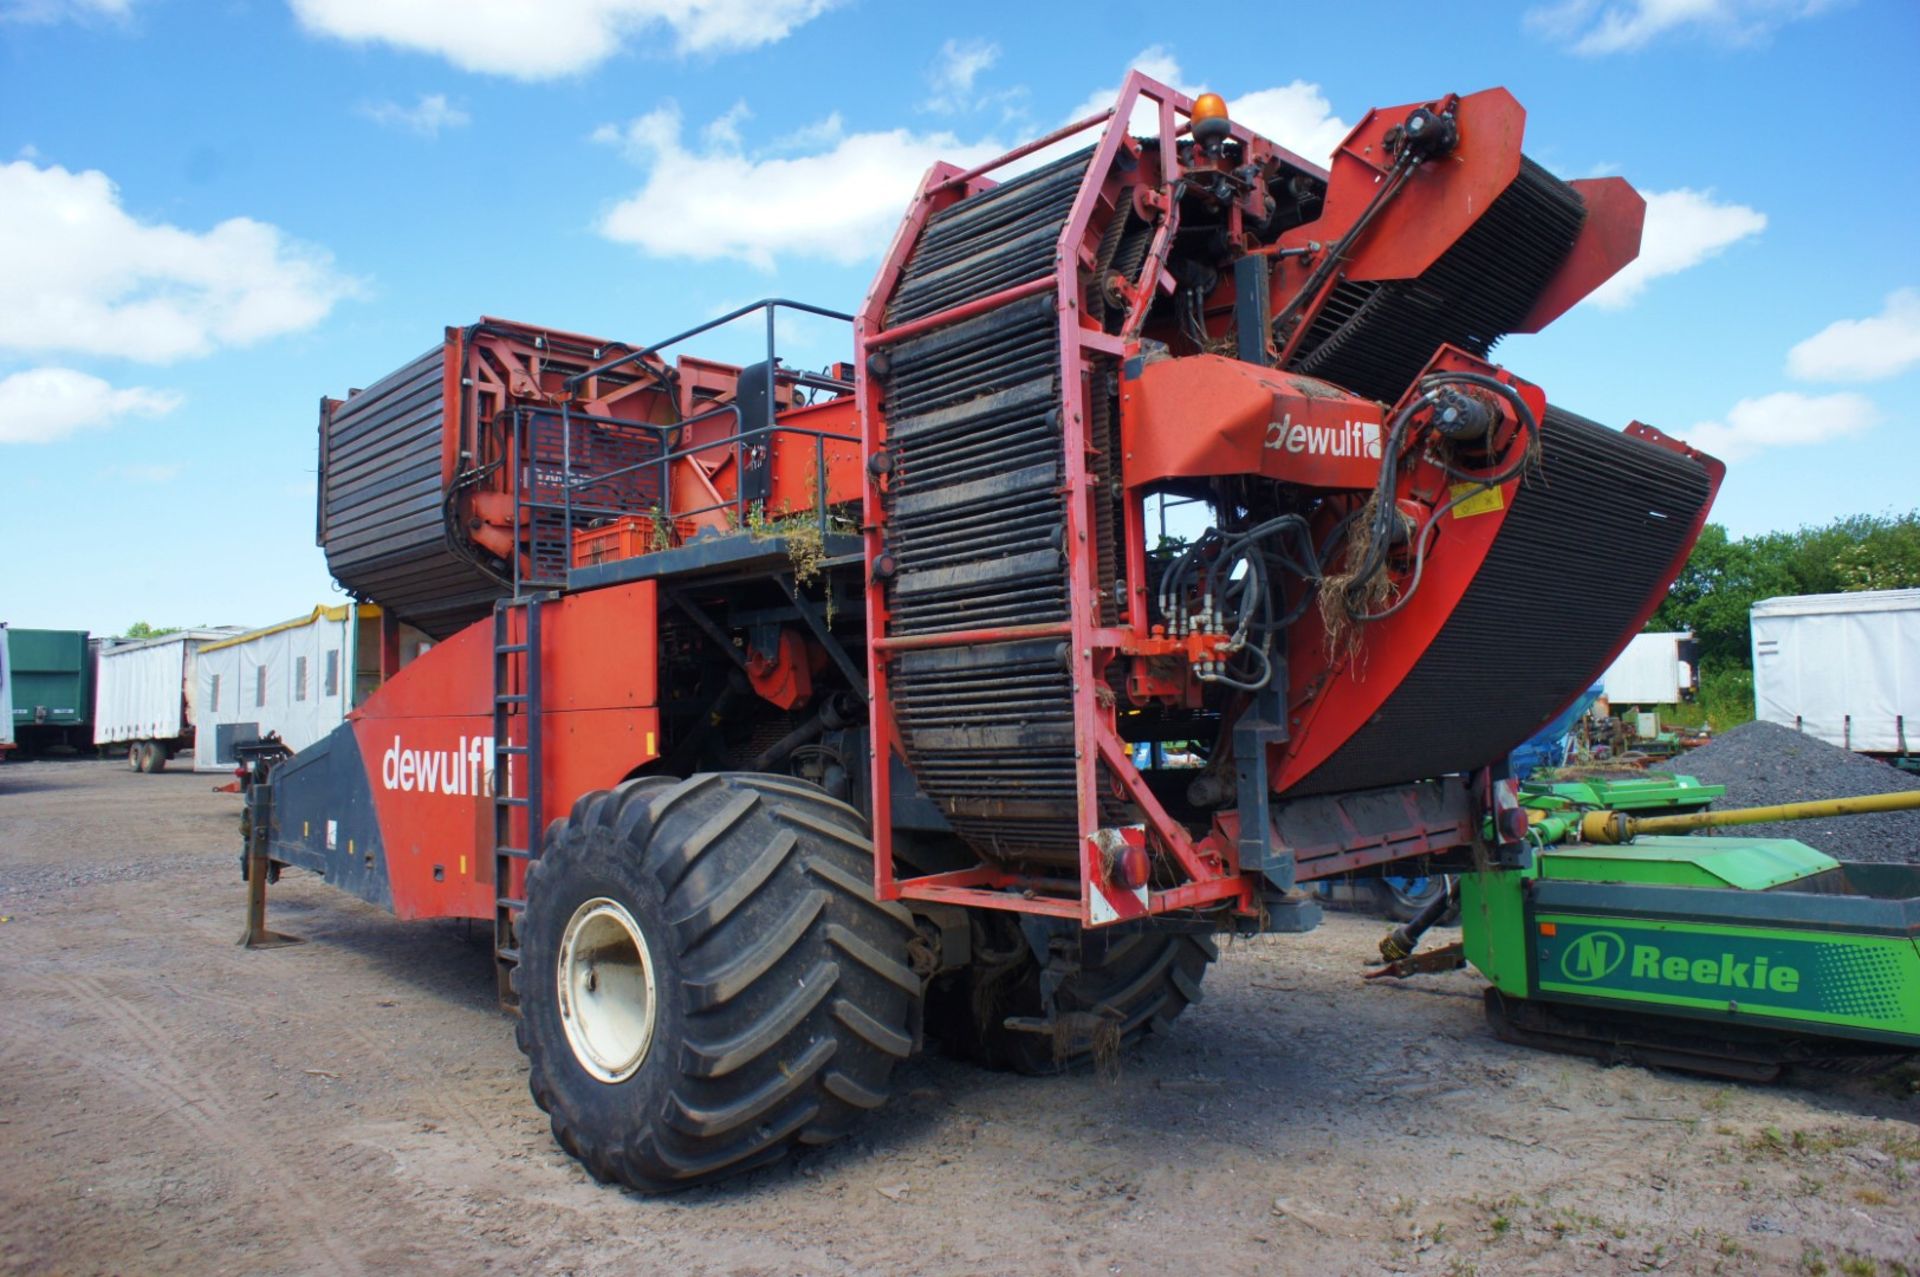 Dewulf RS2060 Trailed 2-Row Sieving Harvester, Serial Number 5811679, Year 2011 - Image 3 of 10